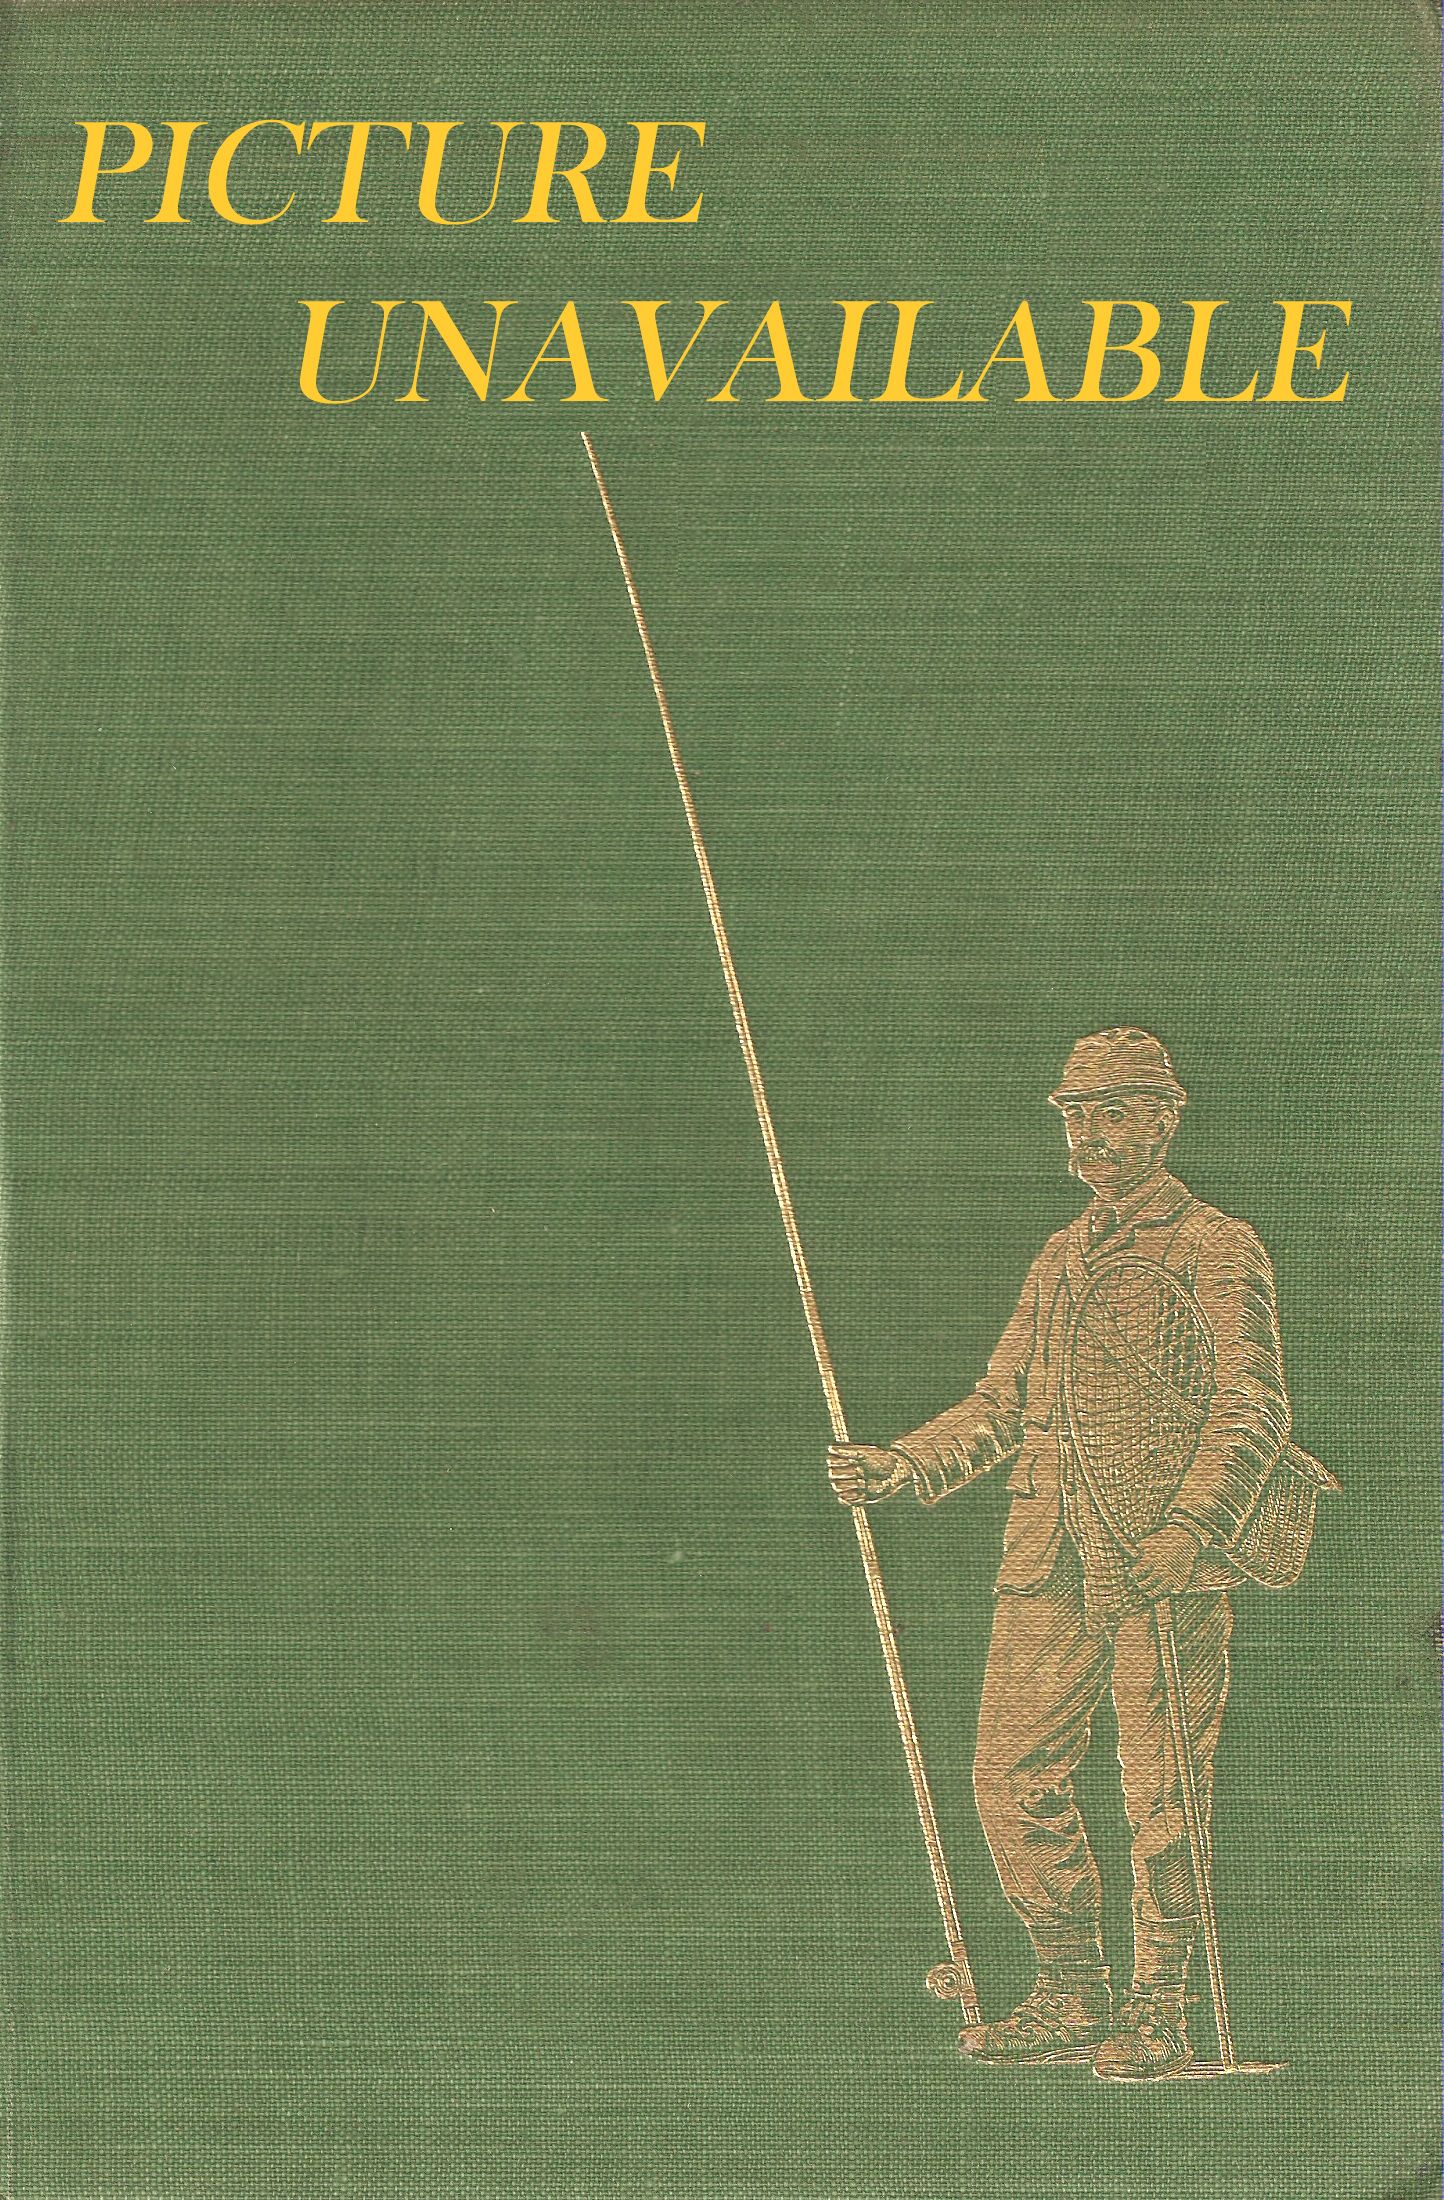 SIMPLIFIED FLY FISHING. By S.R. Slaymaker II. Illustrations by Ned Smith.